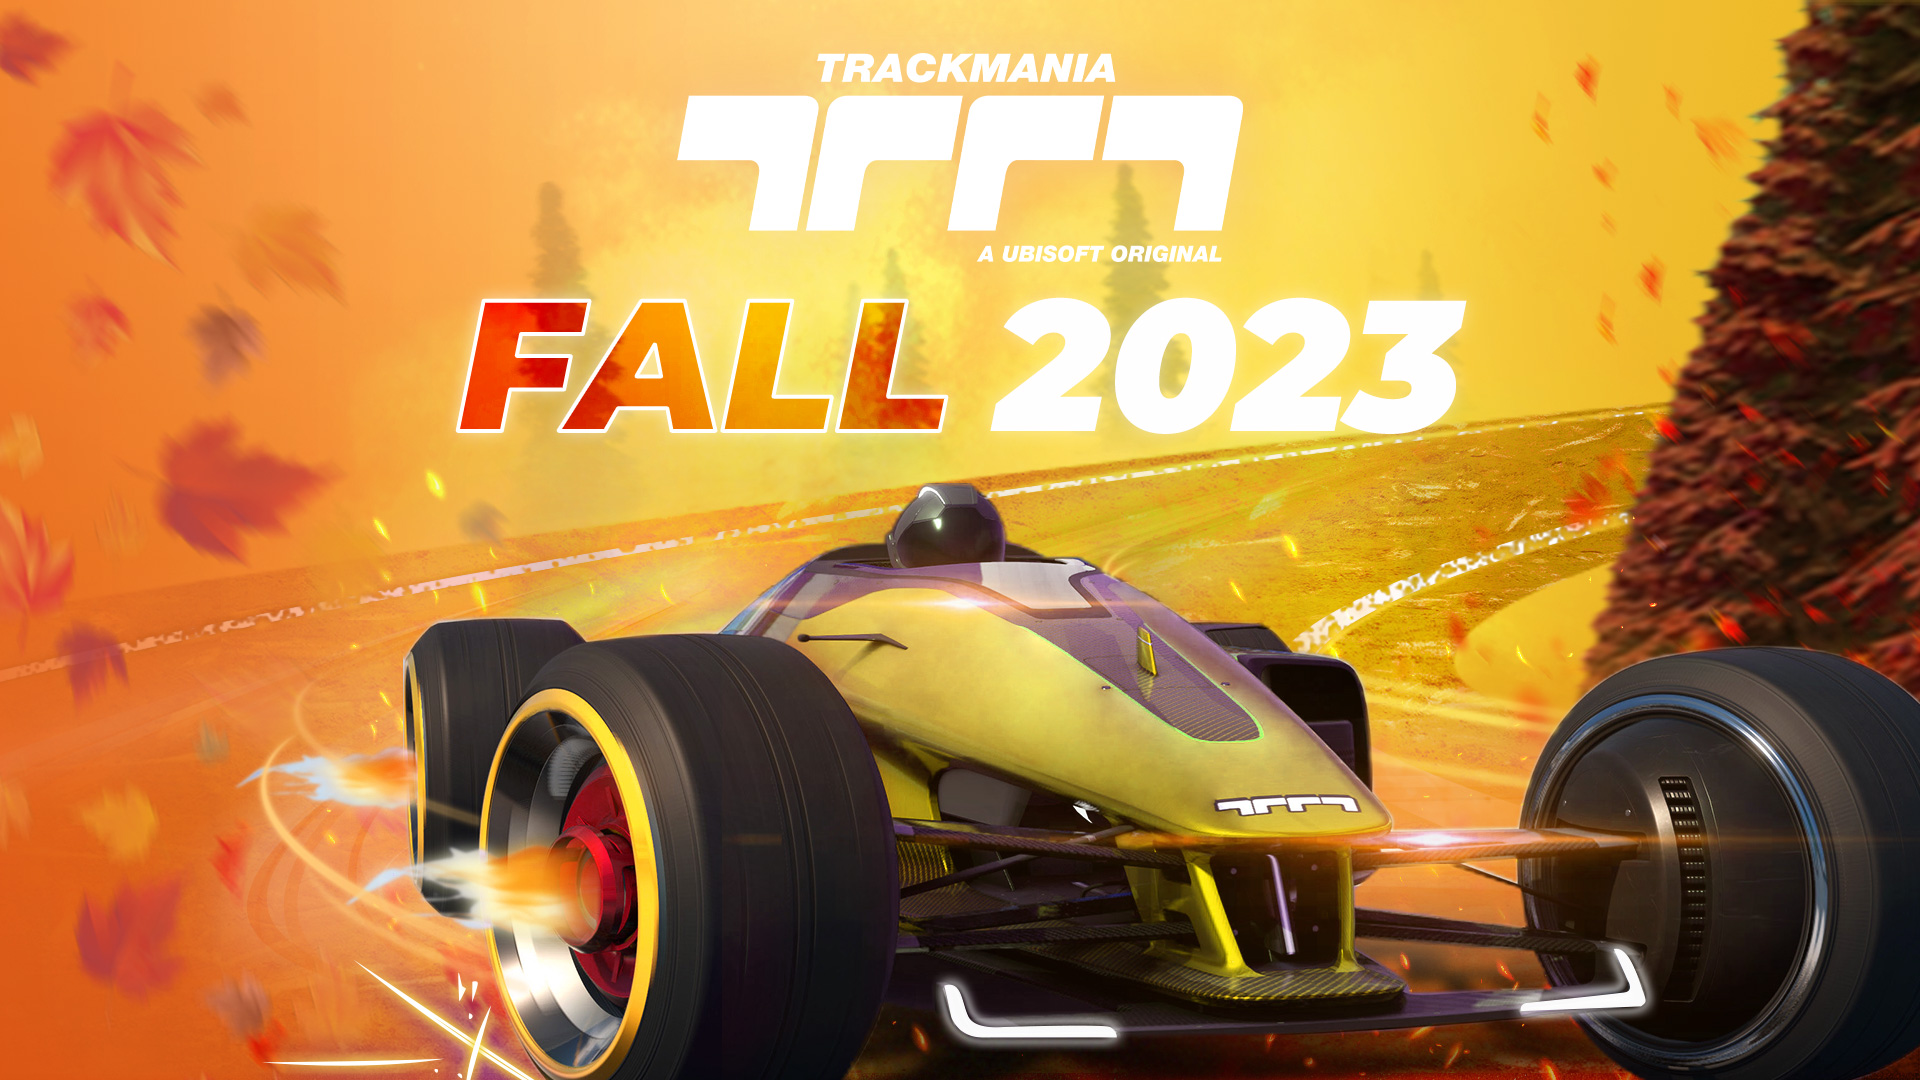 FALL 2023 CAMPAIGN IS COMING ON OCTOBER 1ST!